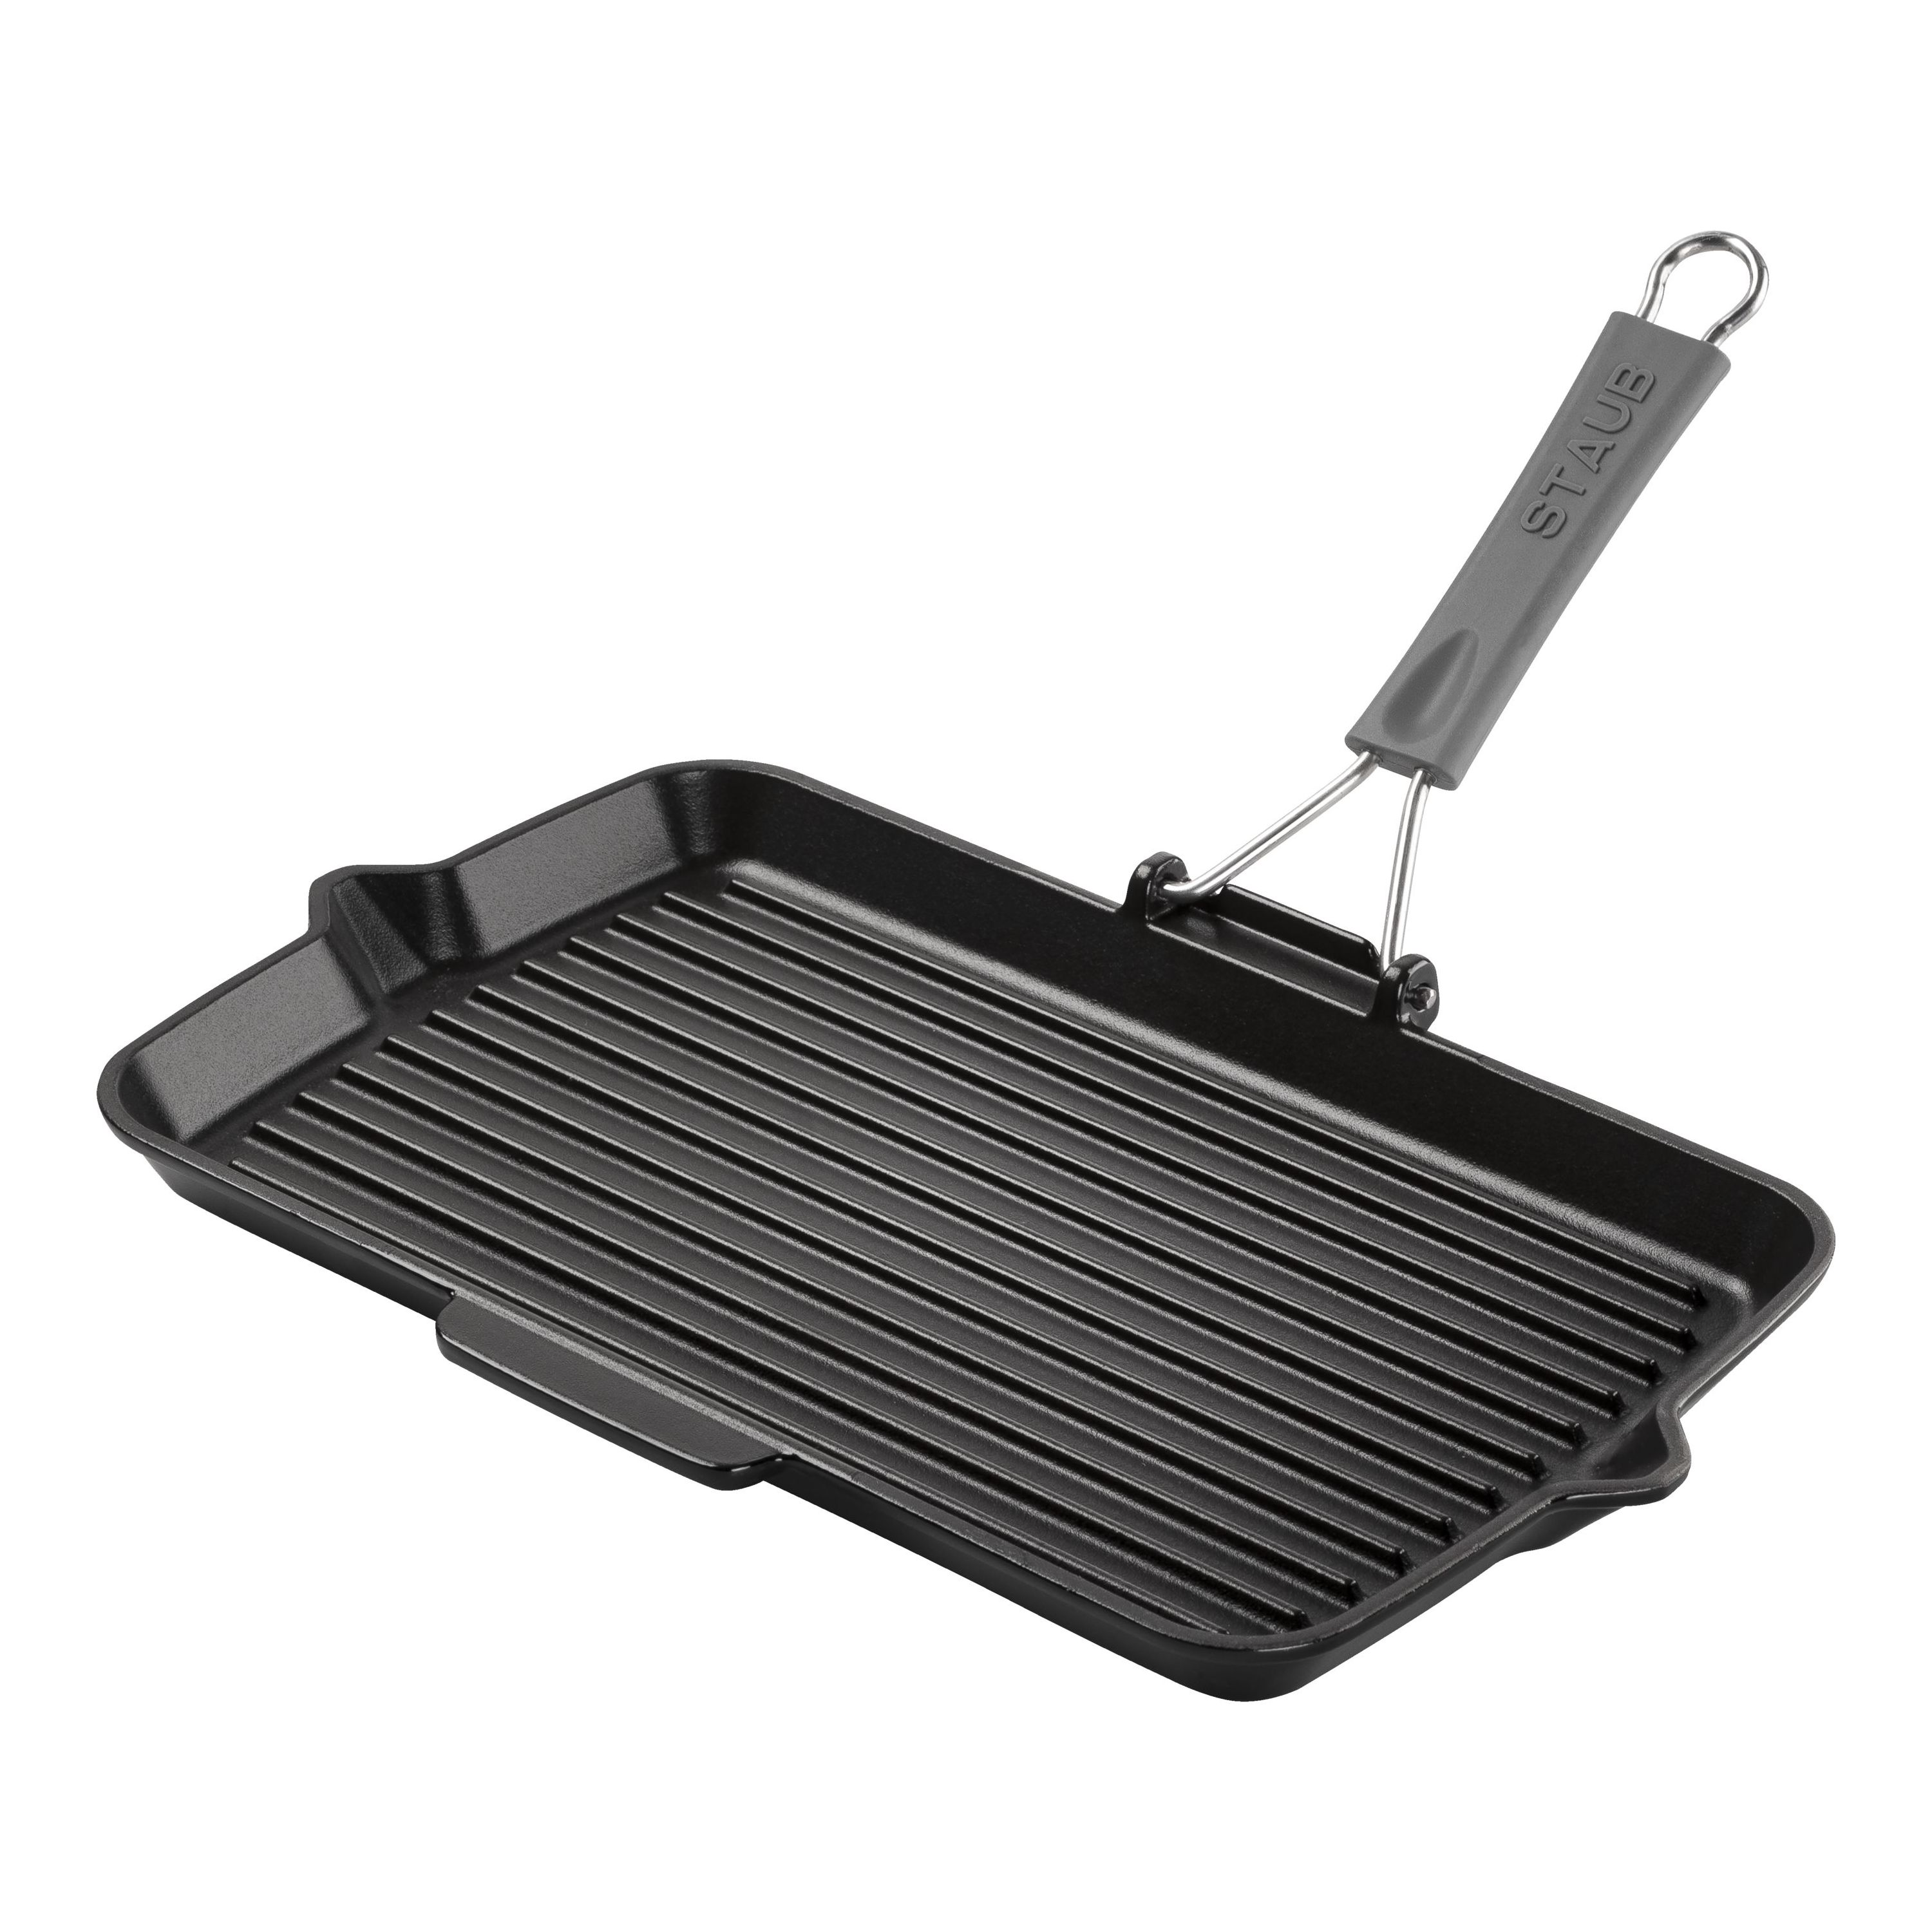 Buy Staub Cast Iron Grill pan with pouring spout